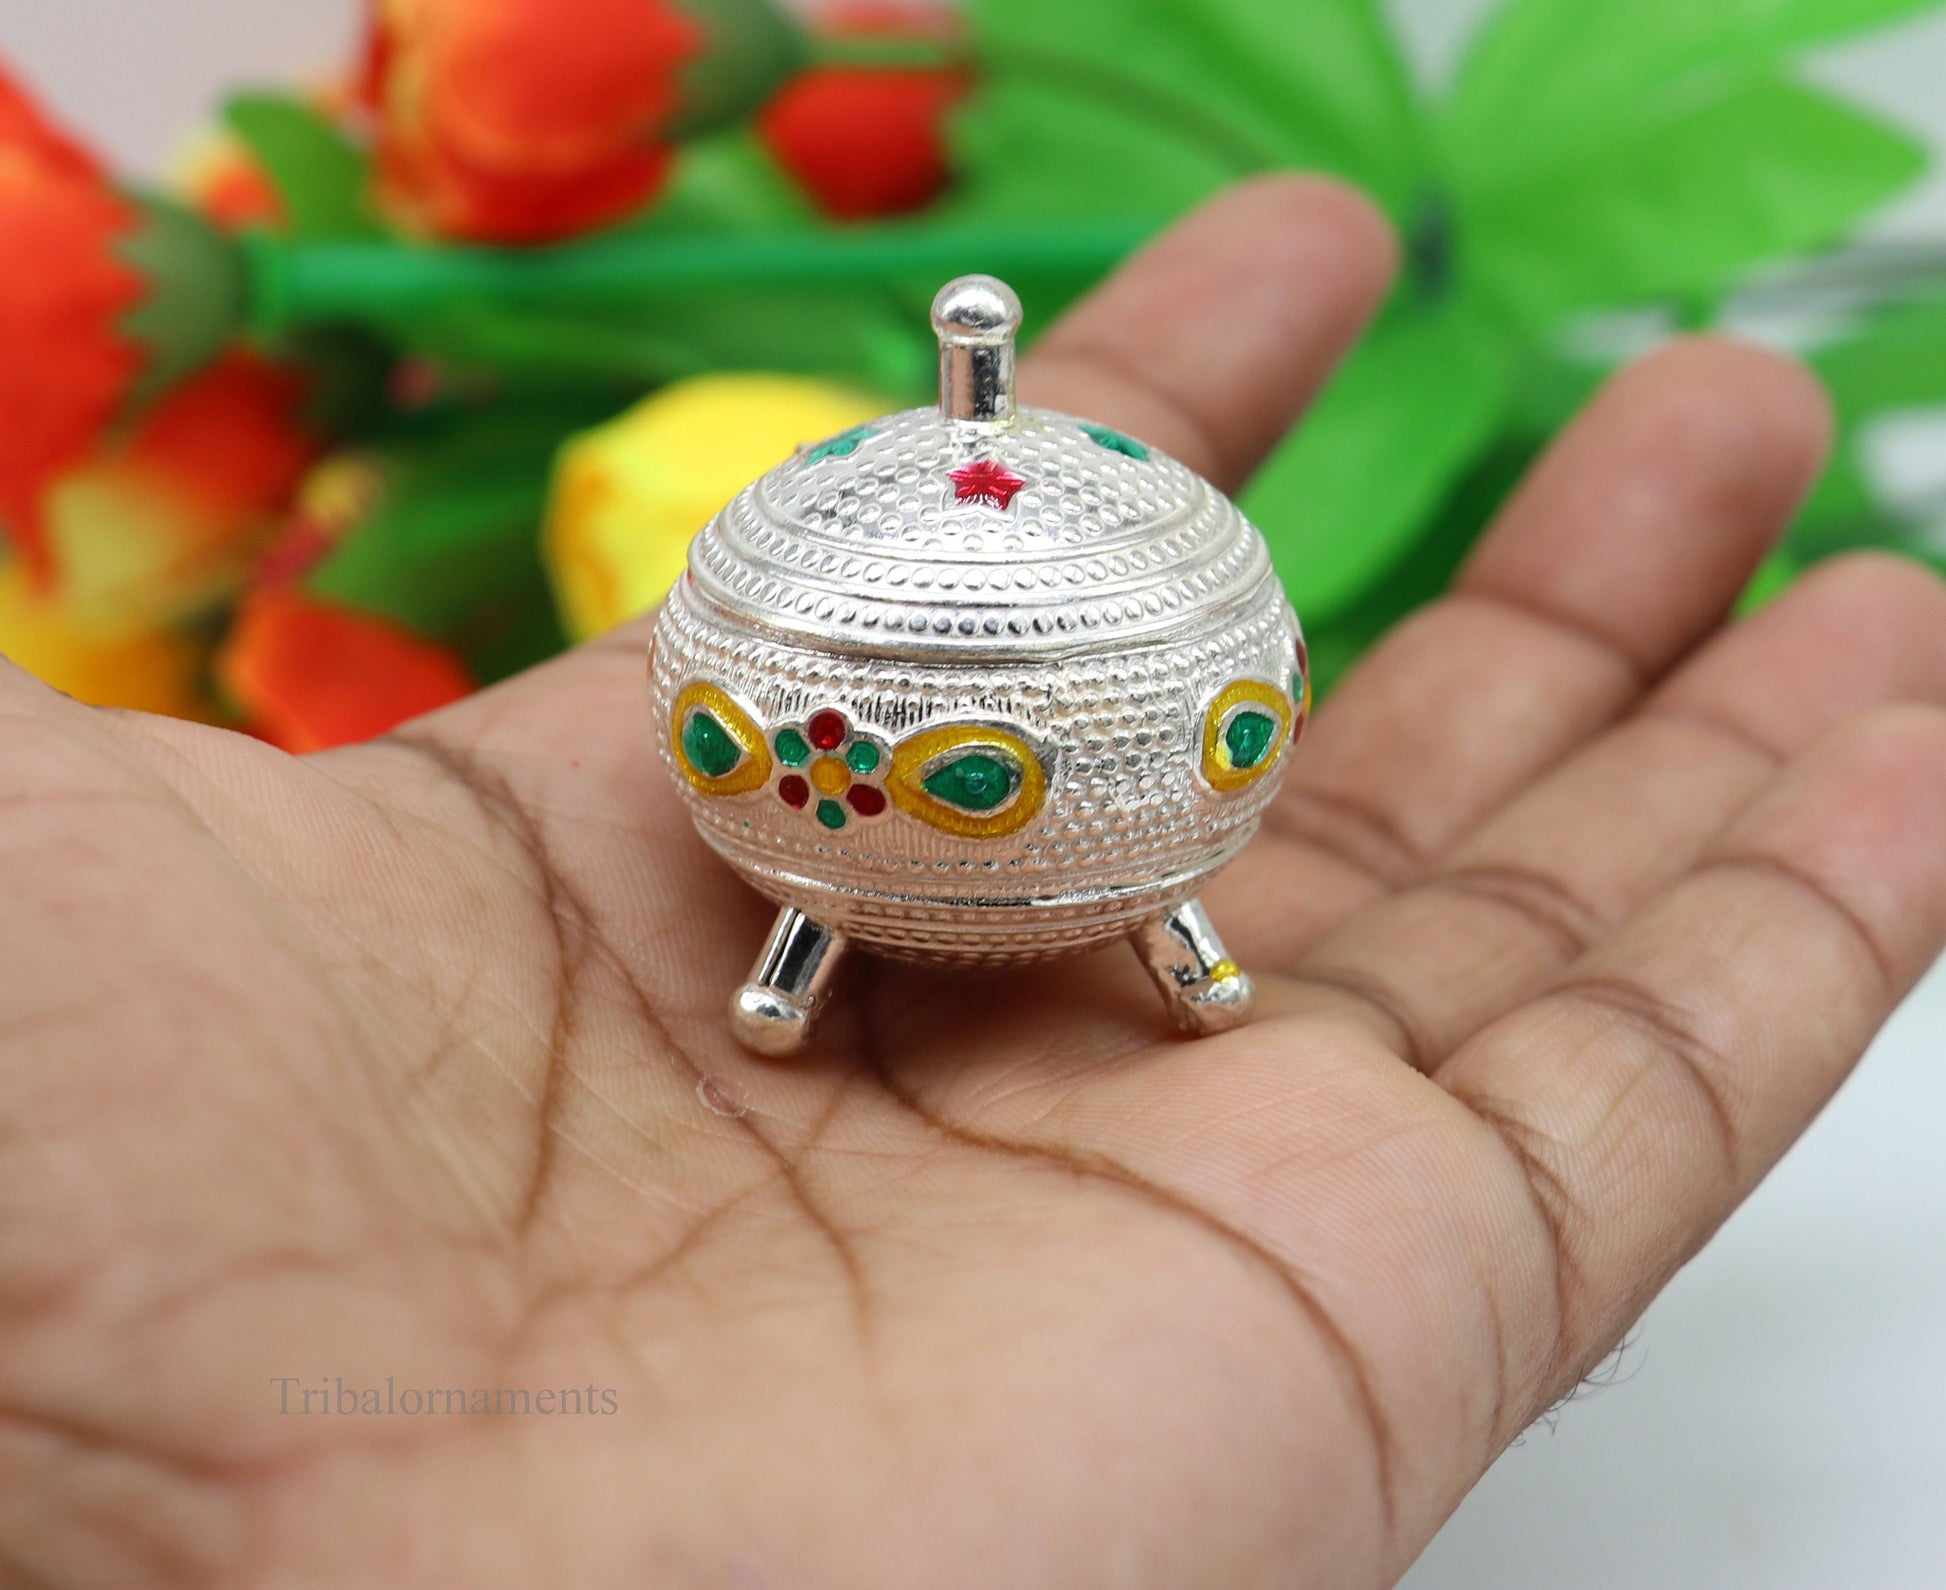 925 Sterling silver handmade fabulous trinket box, solid container box, casket box, sindoor box, enamel work customized gifting box stb179 - TRIBAL ORNAMENTS